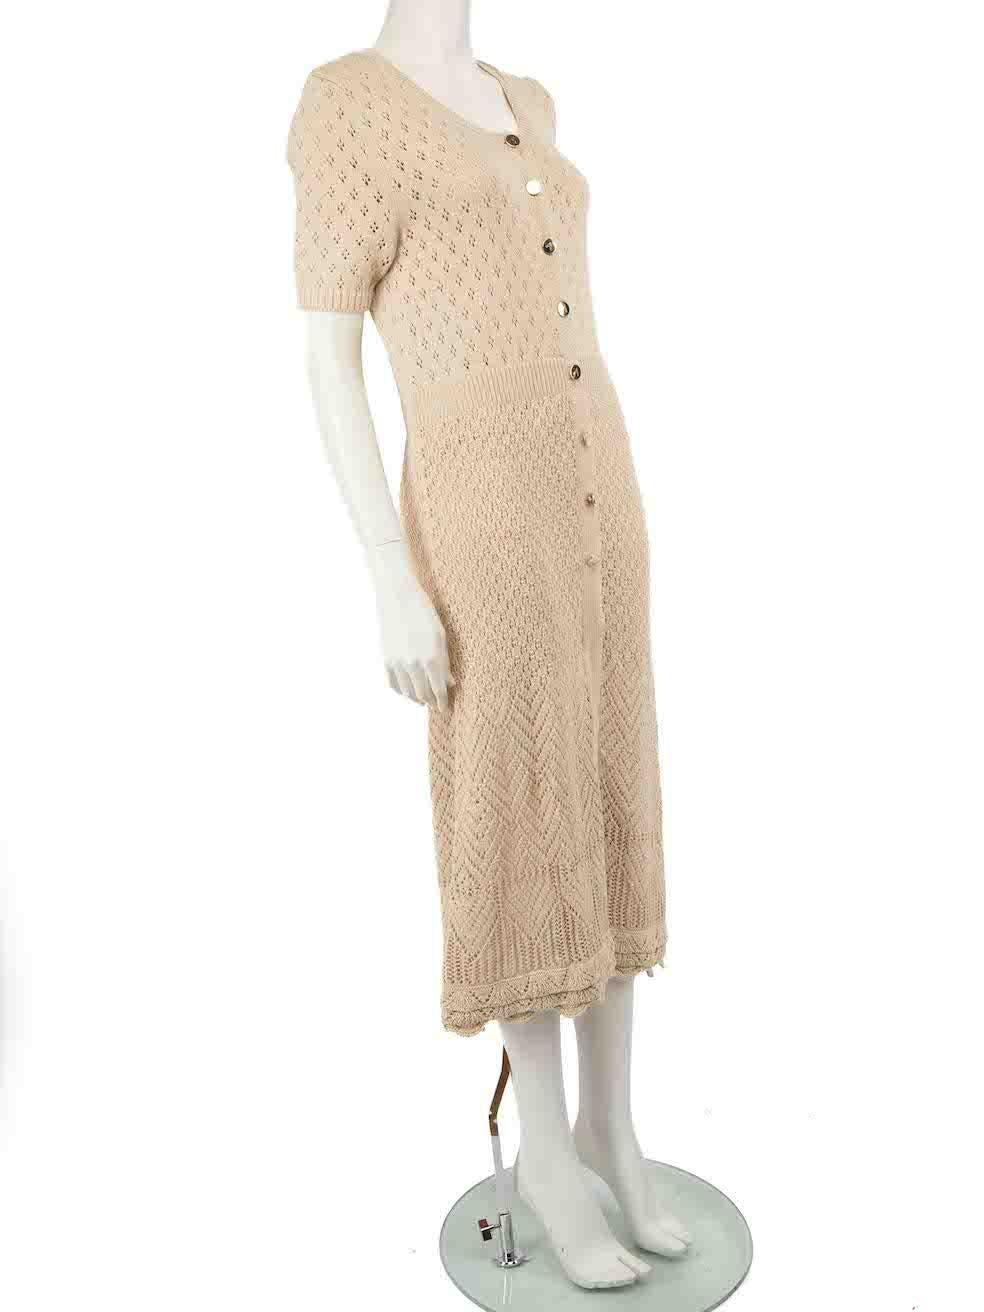 CONDITION is Very good. Hardly any visible wear to dress is evident on this used Altuzarra designer resale item.
 
 
 
 Details
 
 
 Beige
 
 Cotton
 
 Midi dress
 
 Knitted and stretchy
 
 Round neckline
 
 Short sleeves
 
 Crochet zig zag pattern
